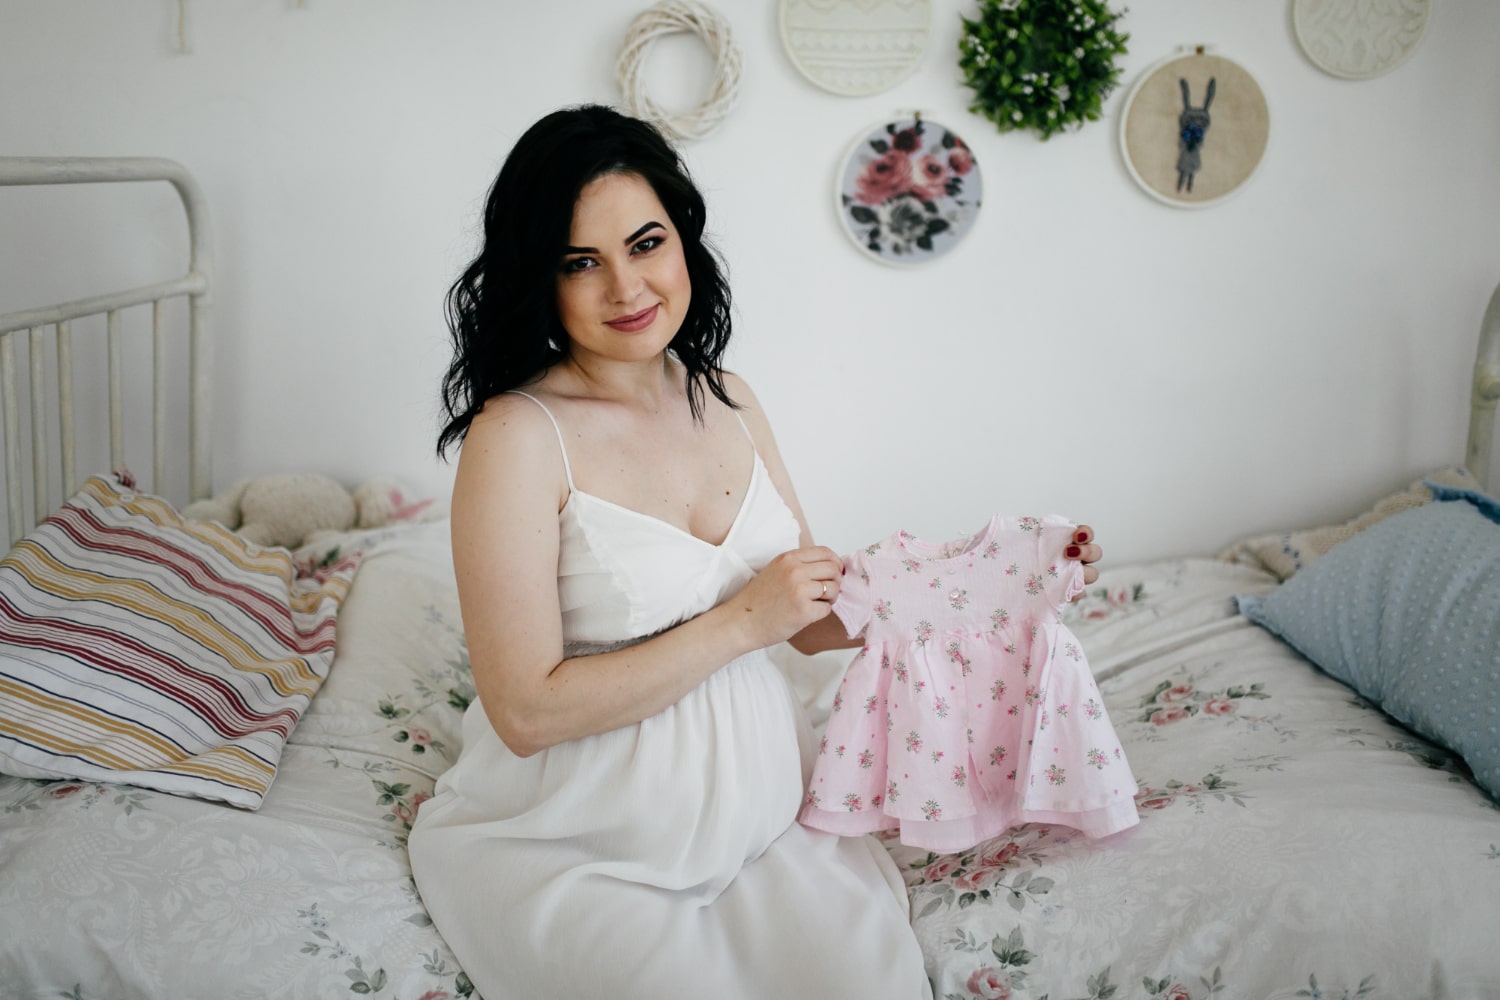  Personal Touch Maternity Photos: Uniquely Capturing the Essence of Motherhood